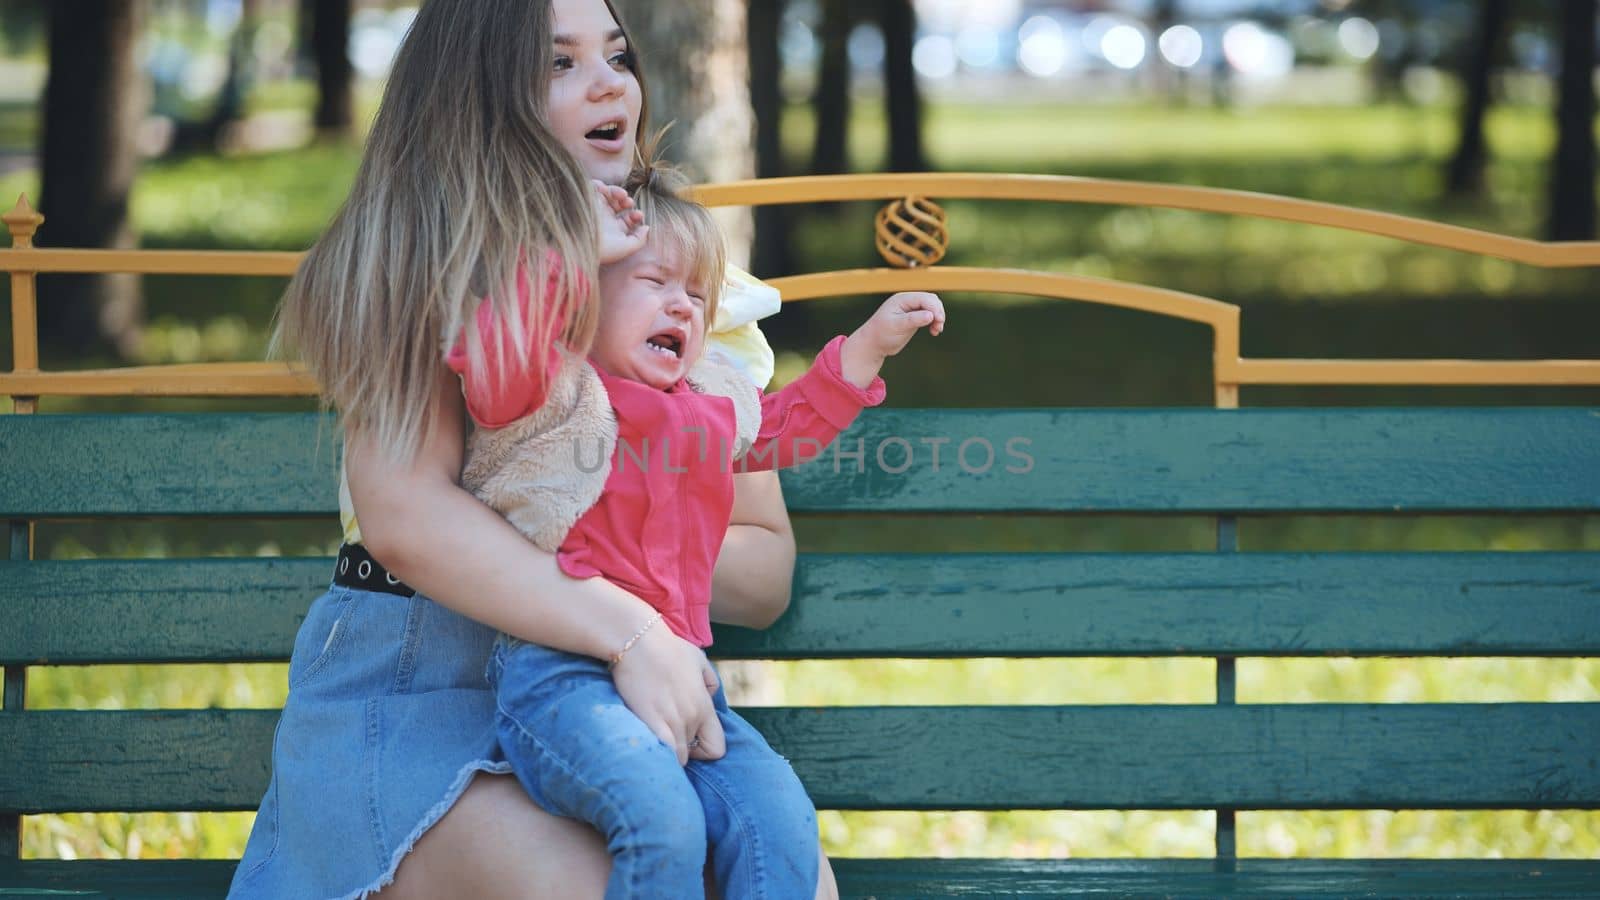 A mother soothes a crying baby in the park